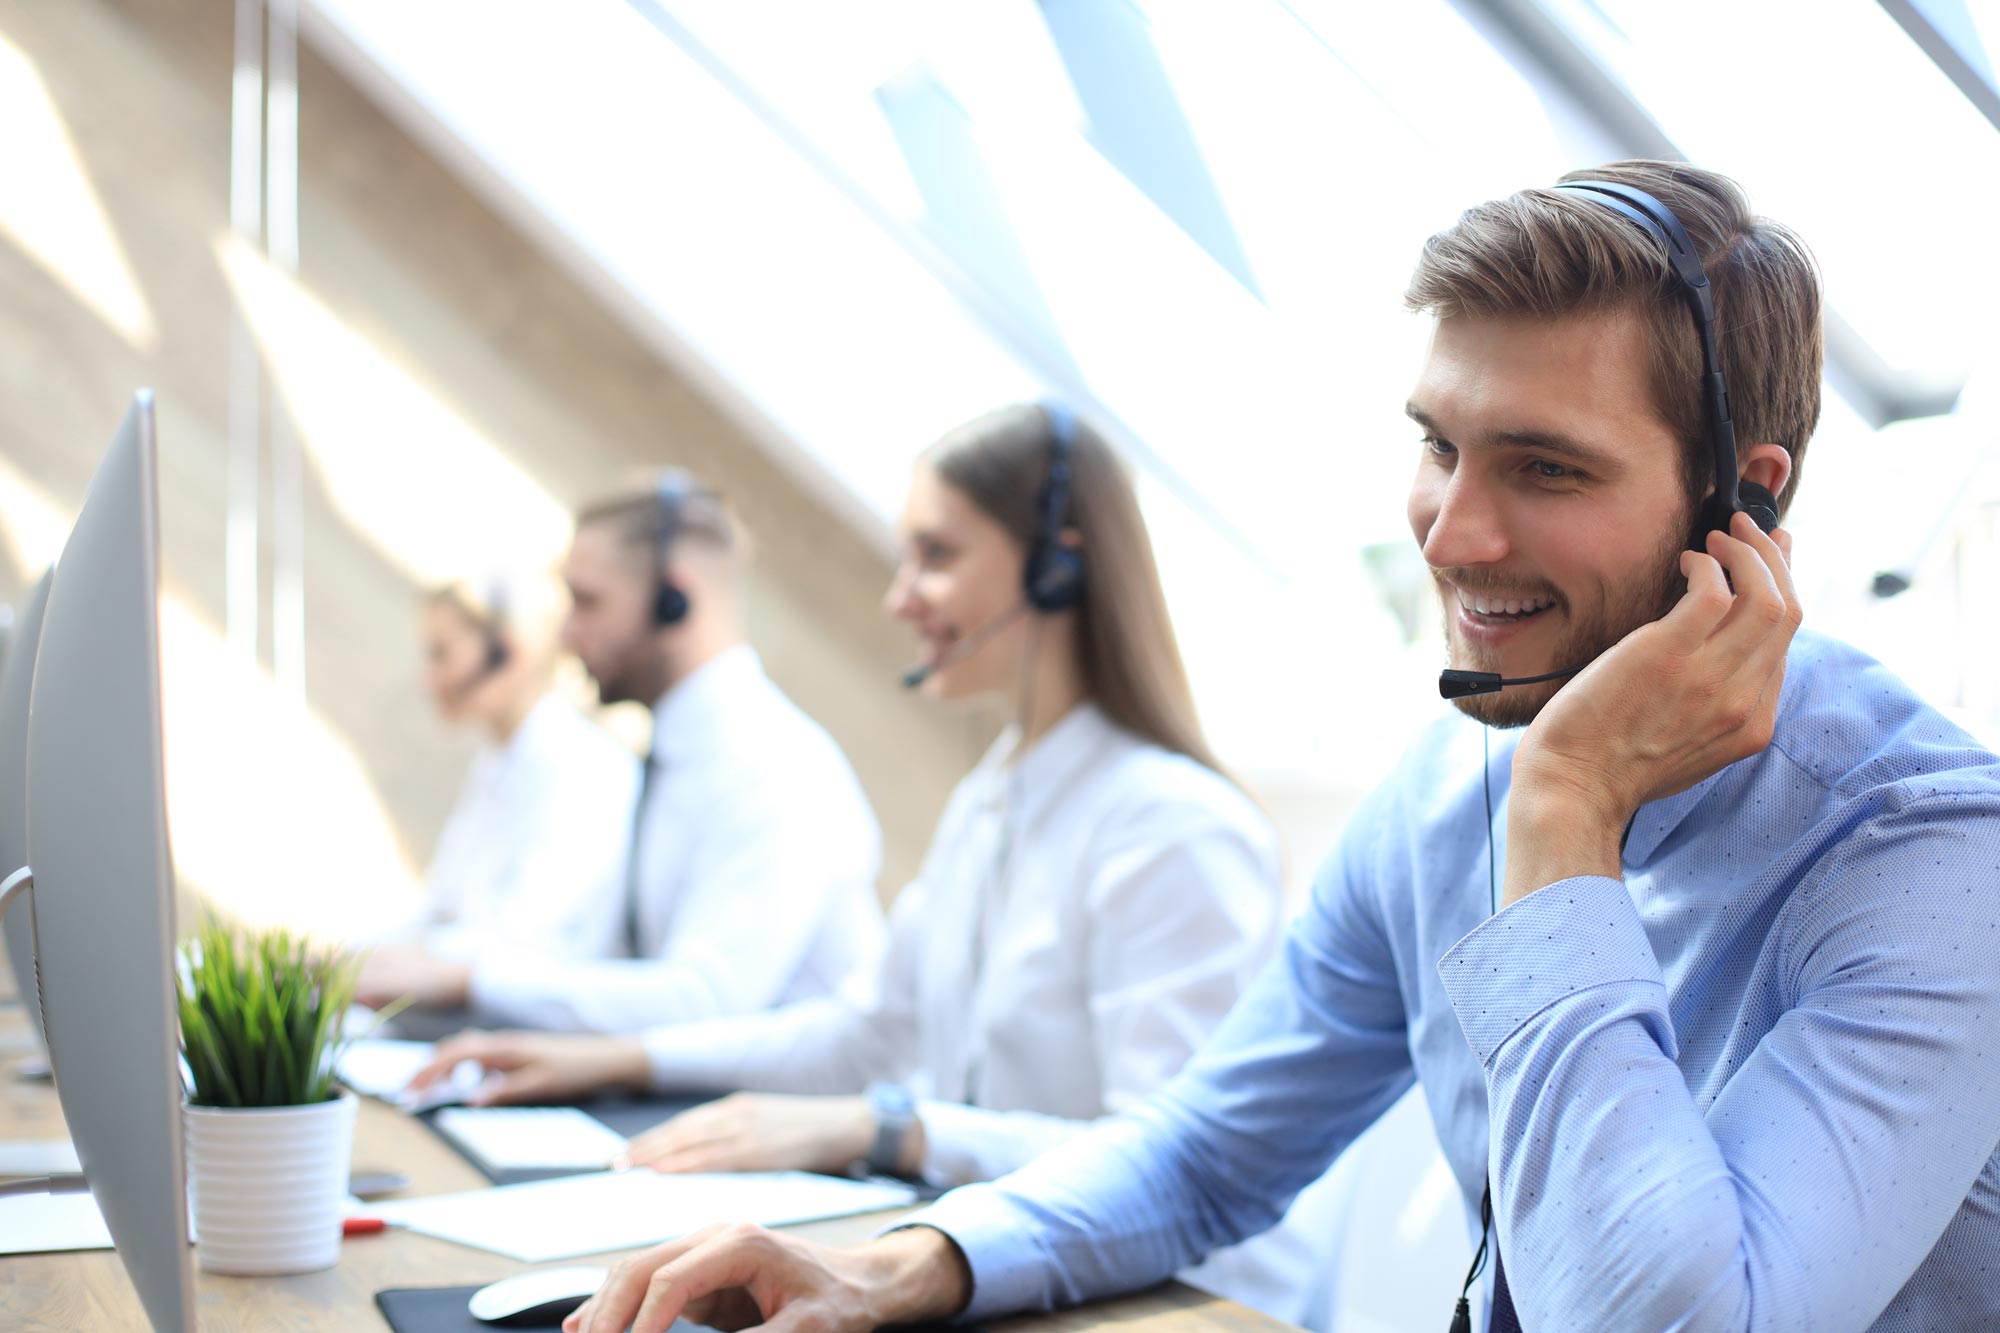 a consumer rates their experience with the contact center interaction as a part of their customer journey